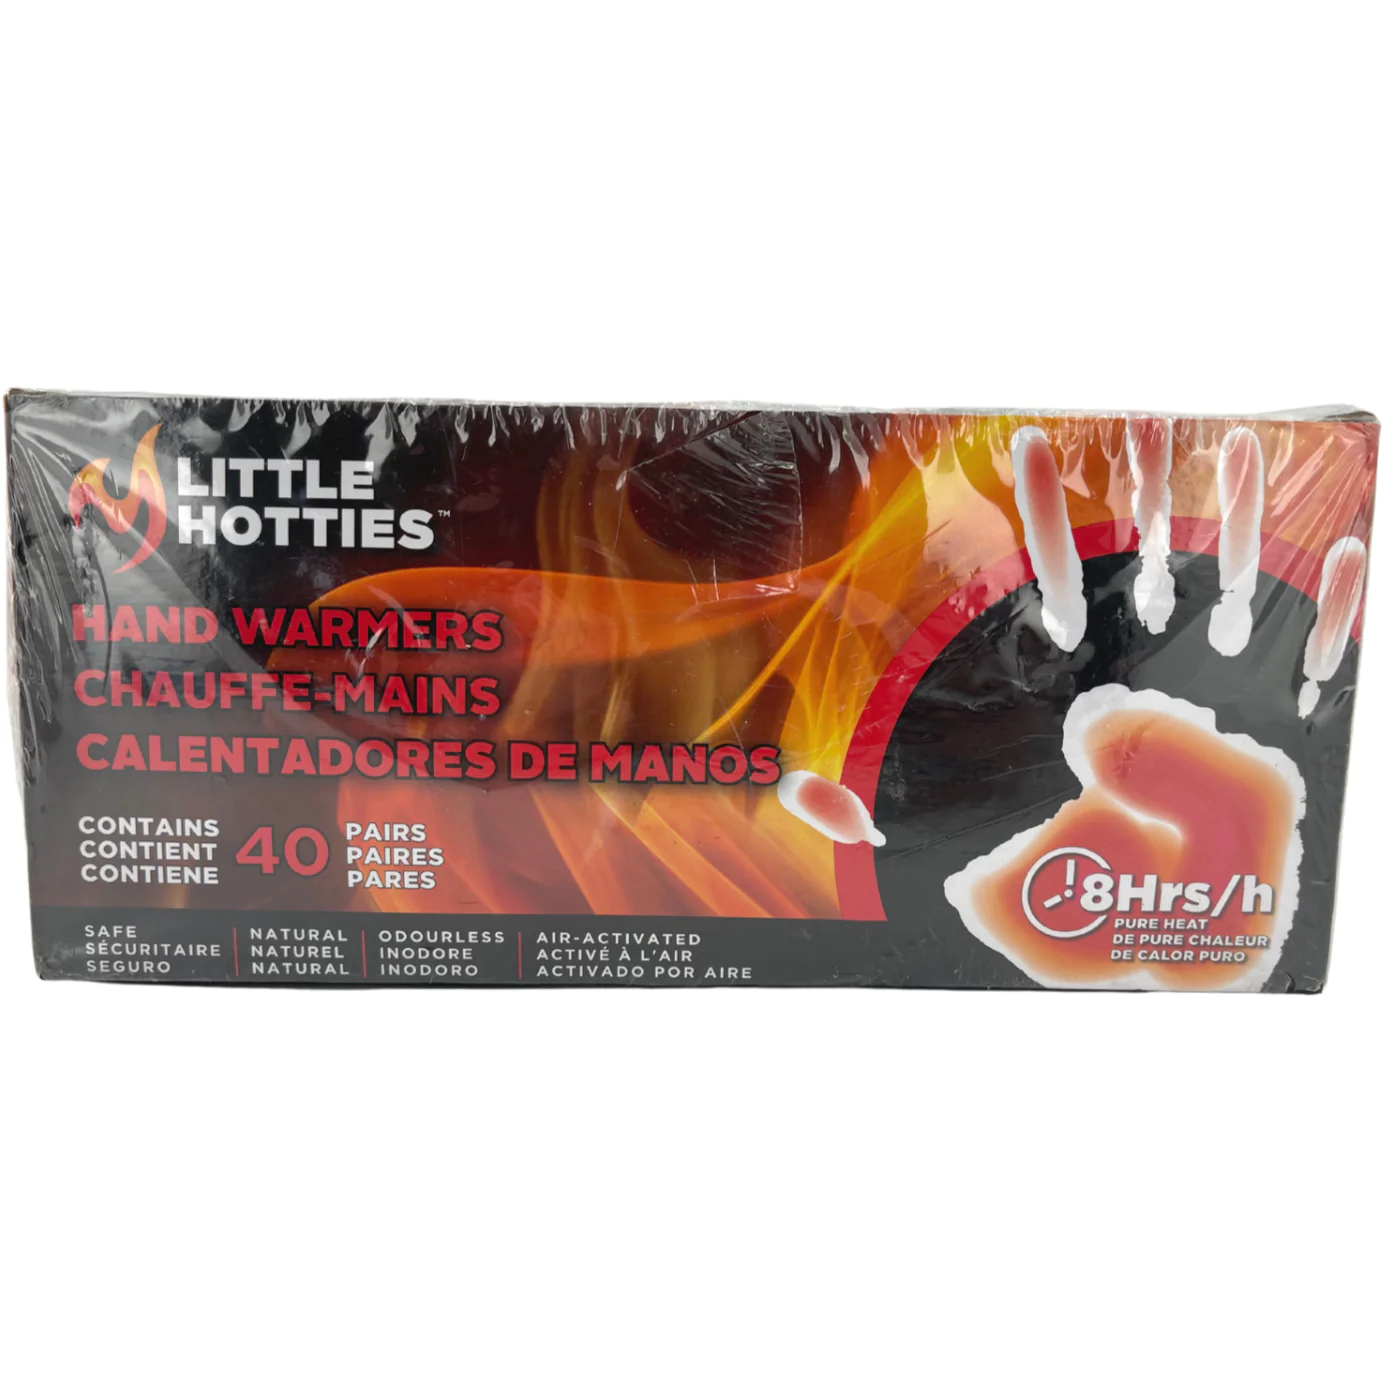 Little Hotties Hand Warmers / 8 Hr / 40 Pairs / Air-Activated / All Natural